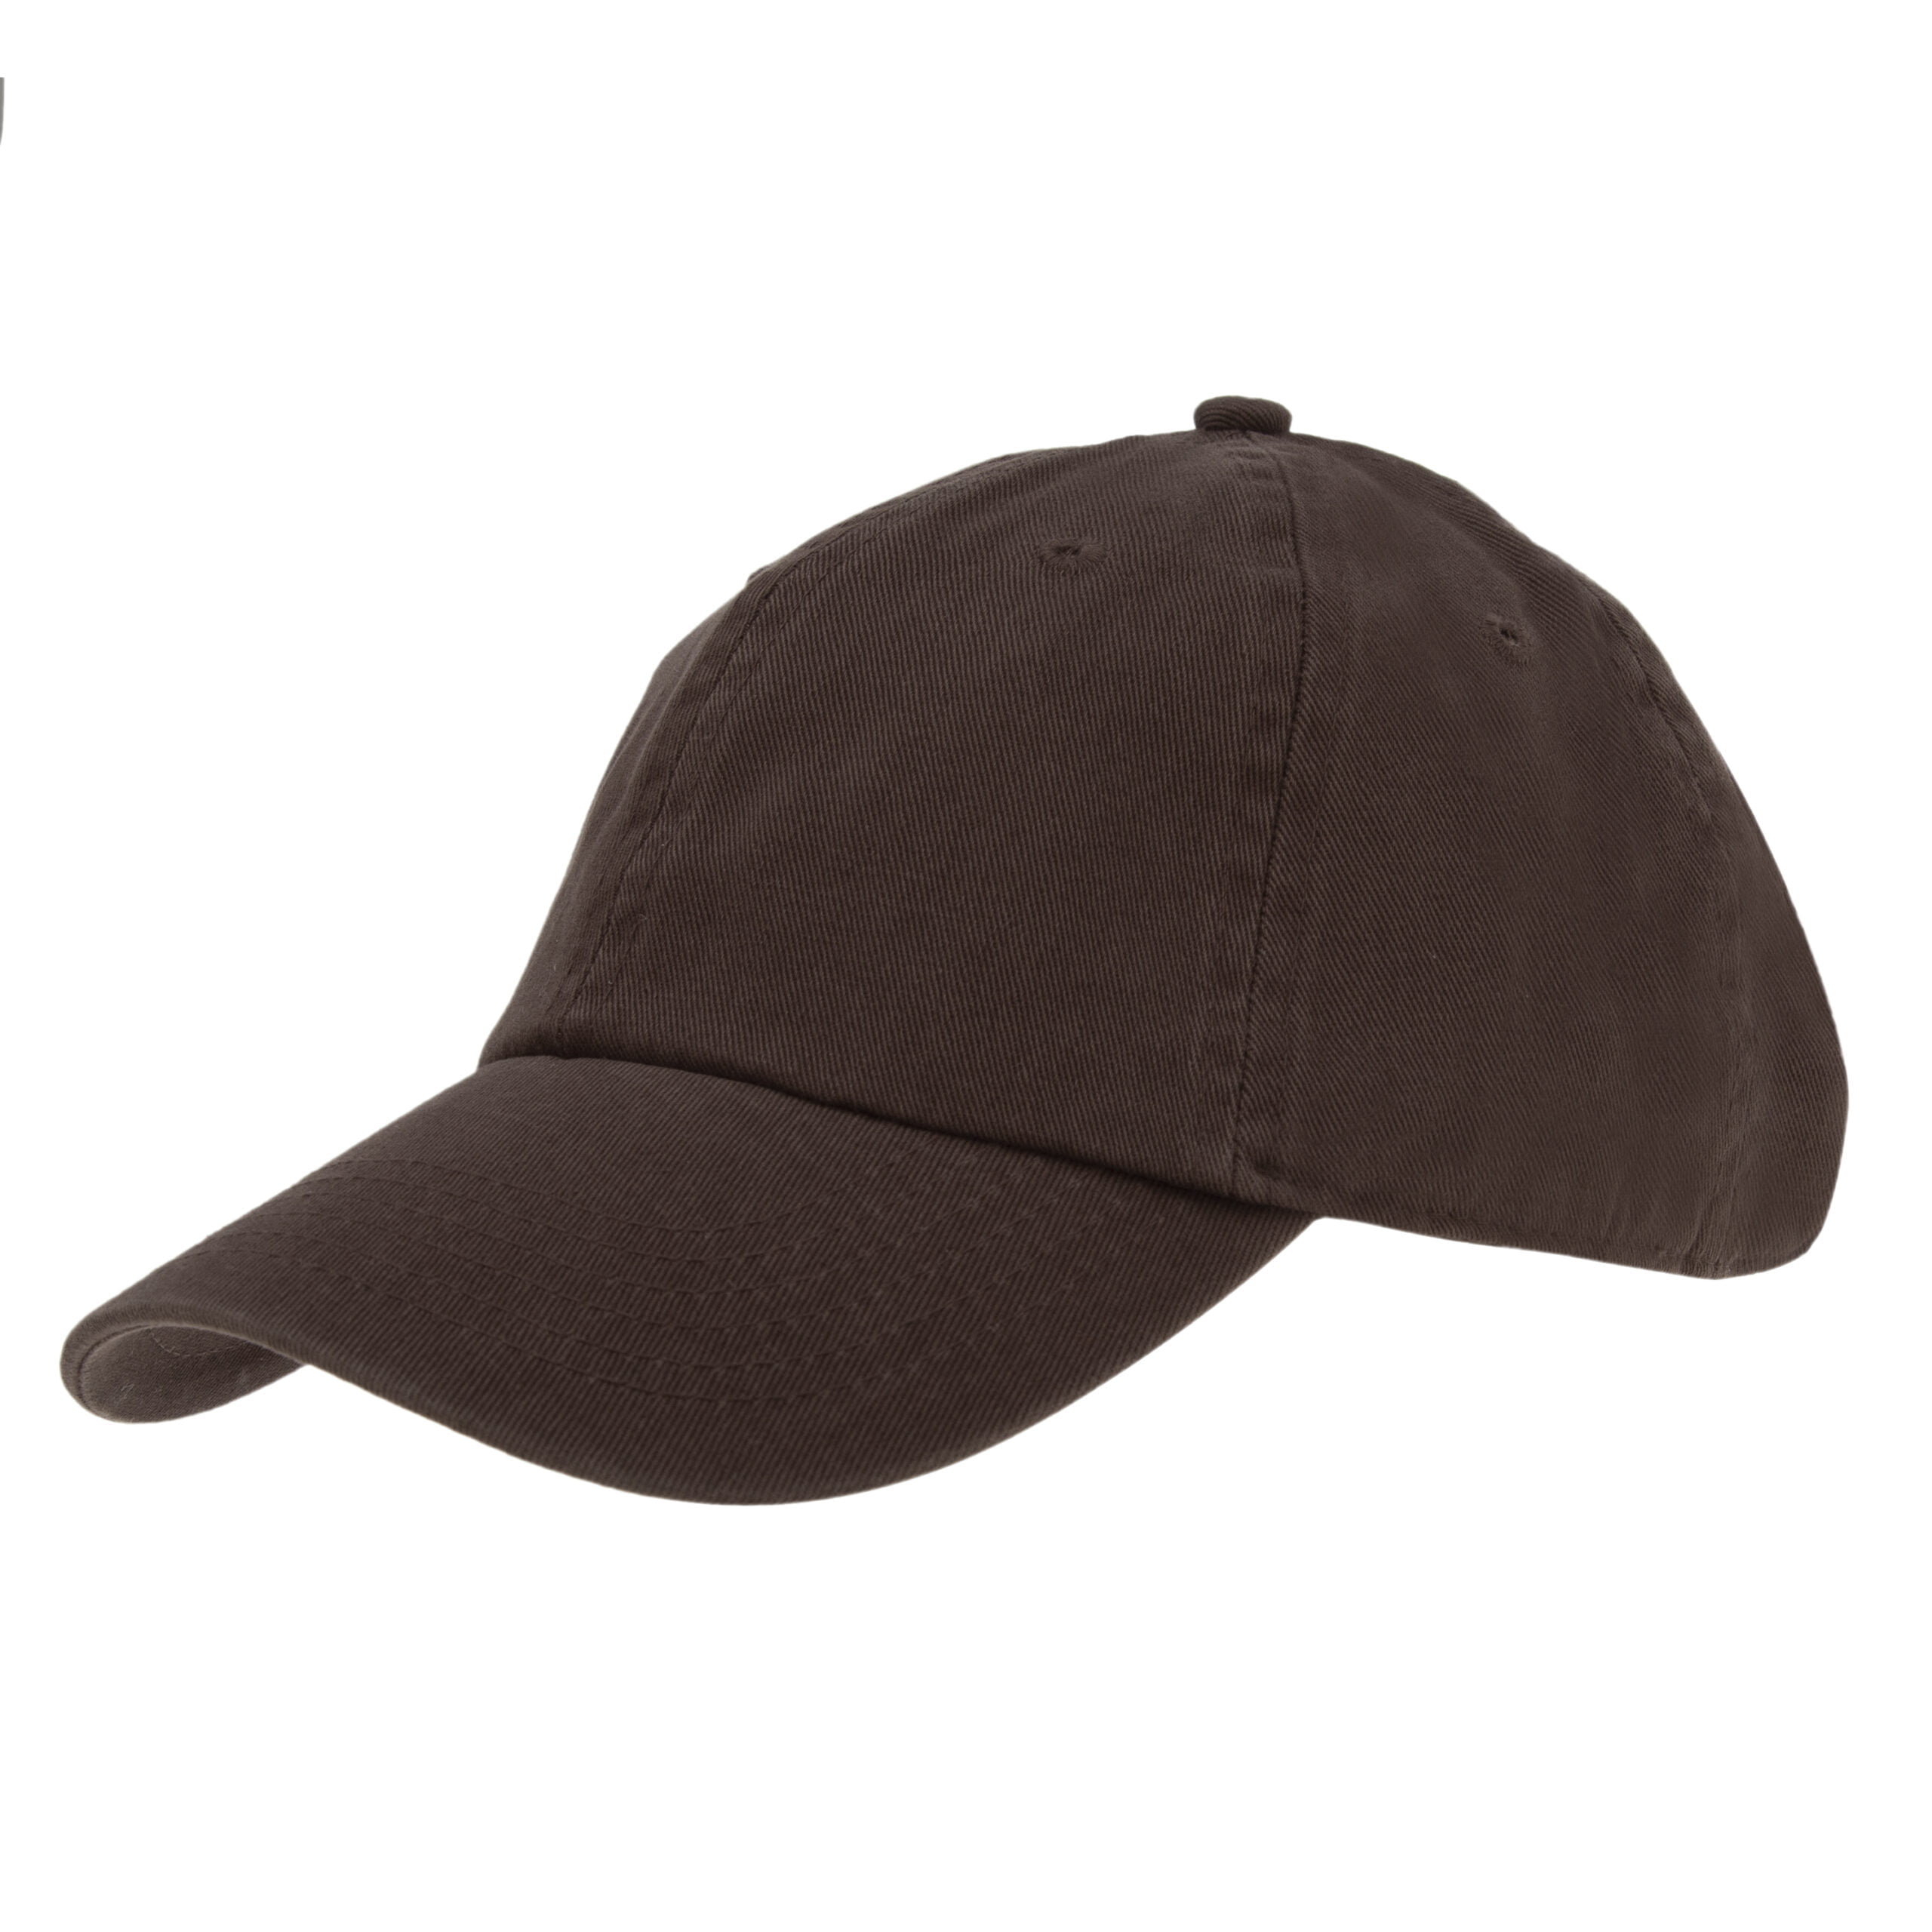 12pcs Dark Brown Solid Baseball Caps Low Profile - Unconstructed - Adjustable Clasp - 100% Cotton - Stone Washed - Bulk by the Dozen - Wholesale